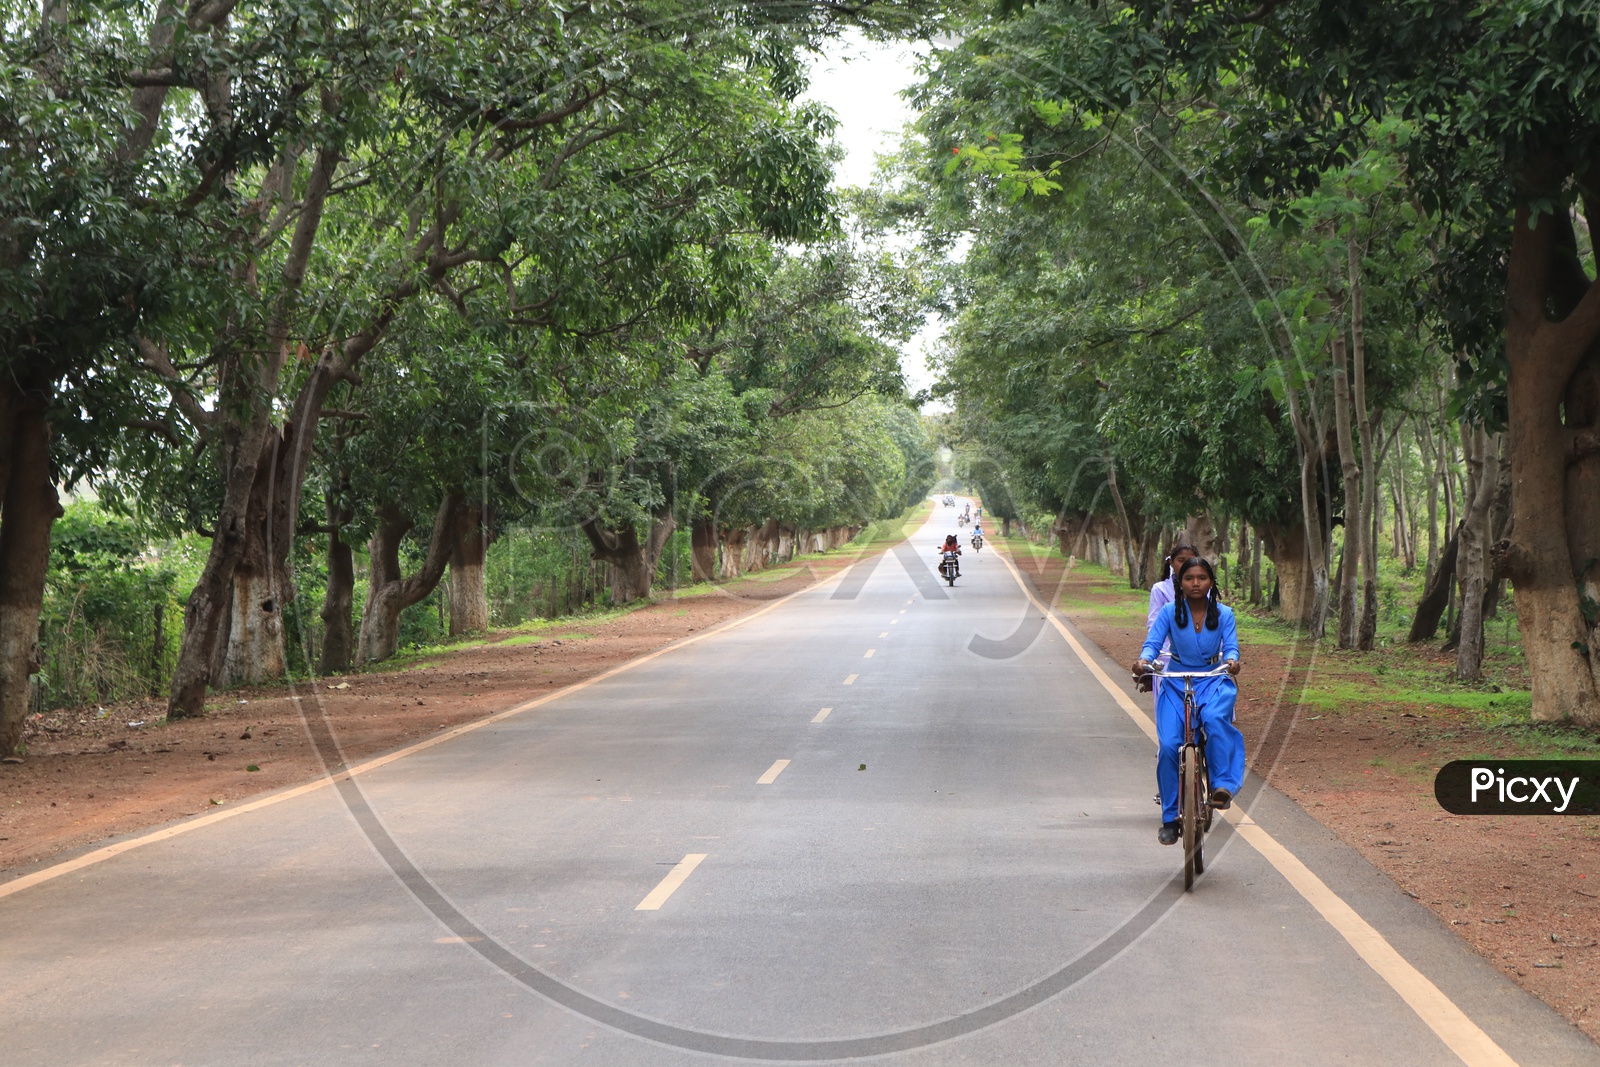 A school girl riding a bicycle on the road with trees on either side